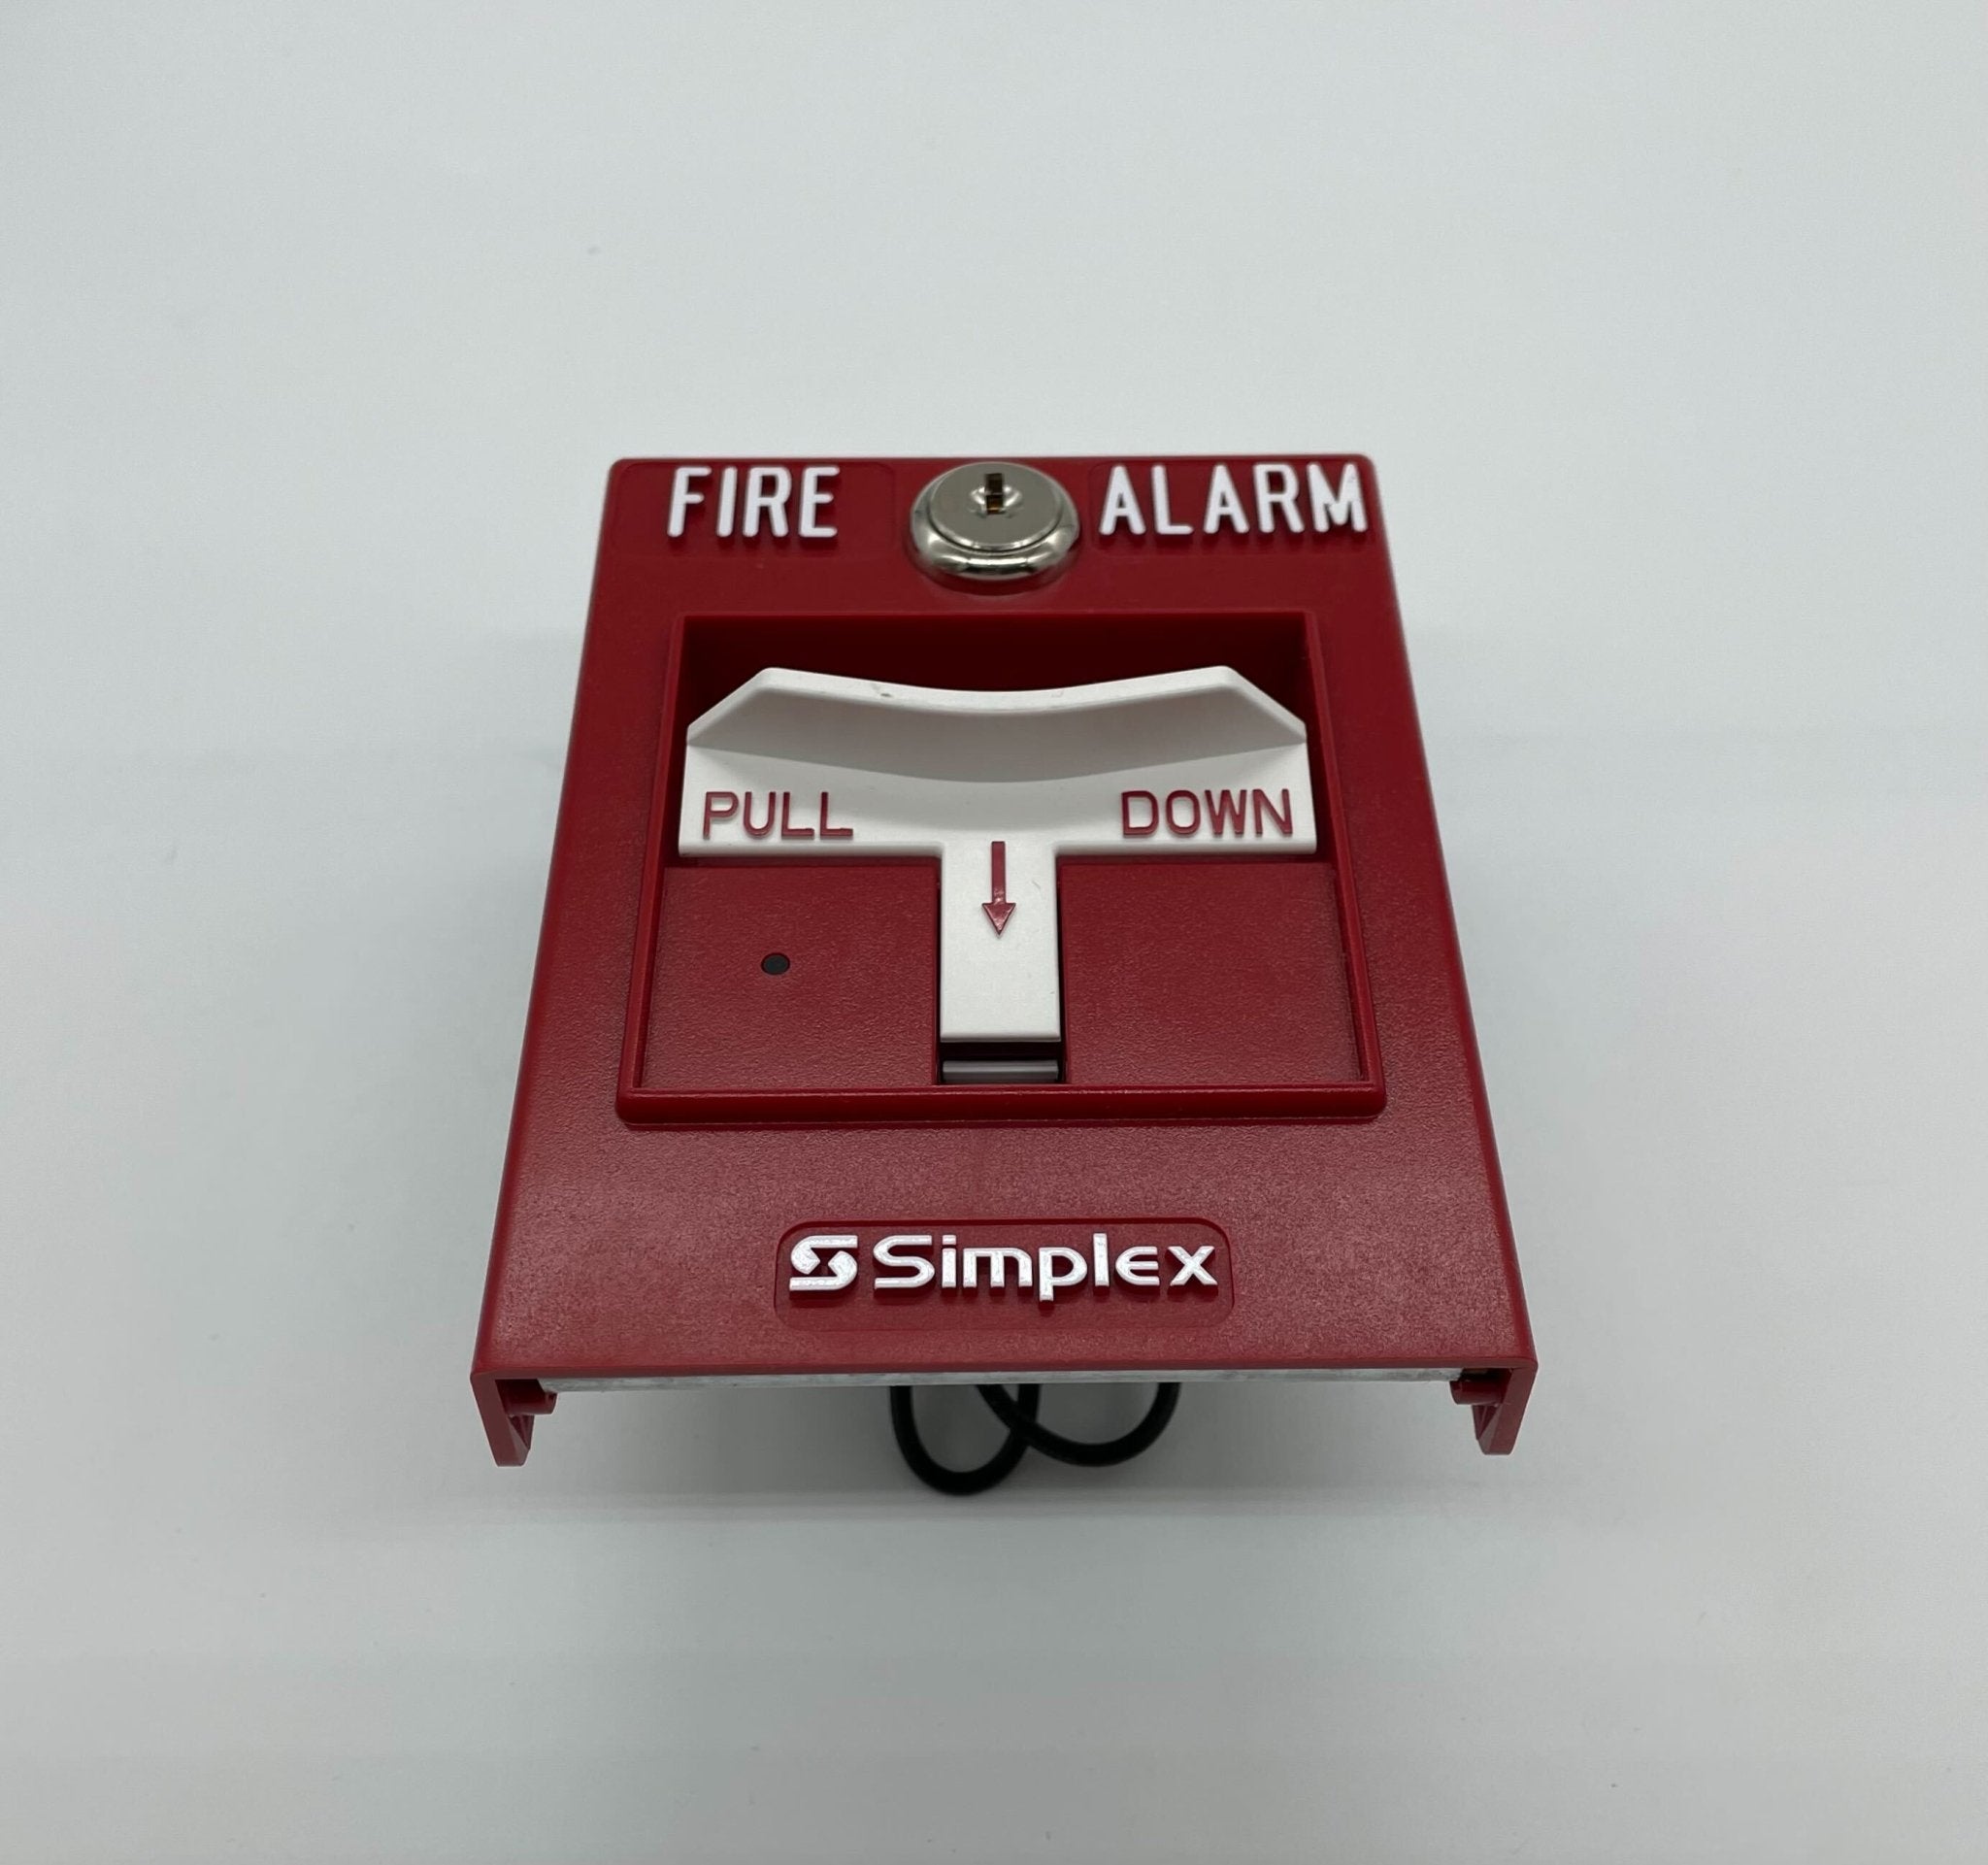 Simplex 4099-9021 No Grip Manual Station - The Fire Alarm Supplier